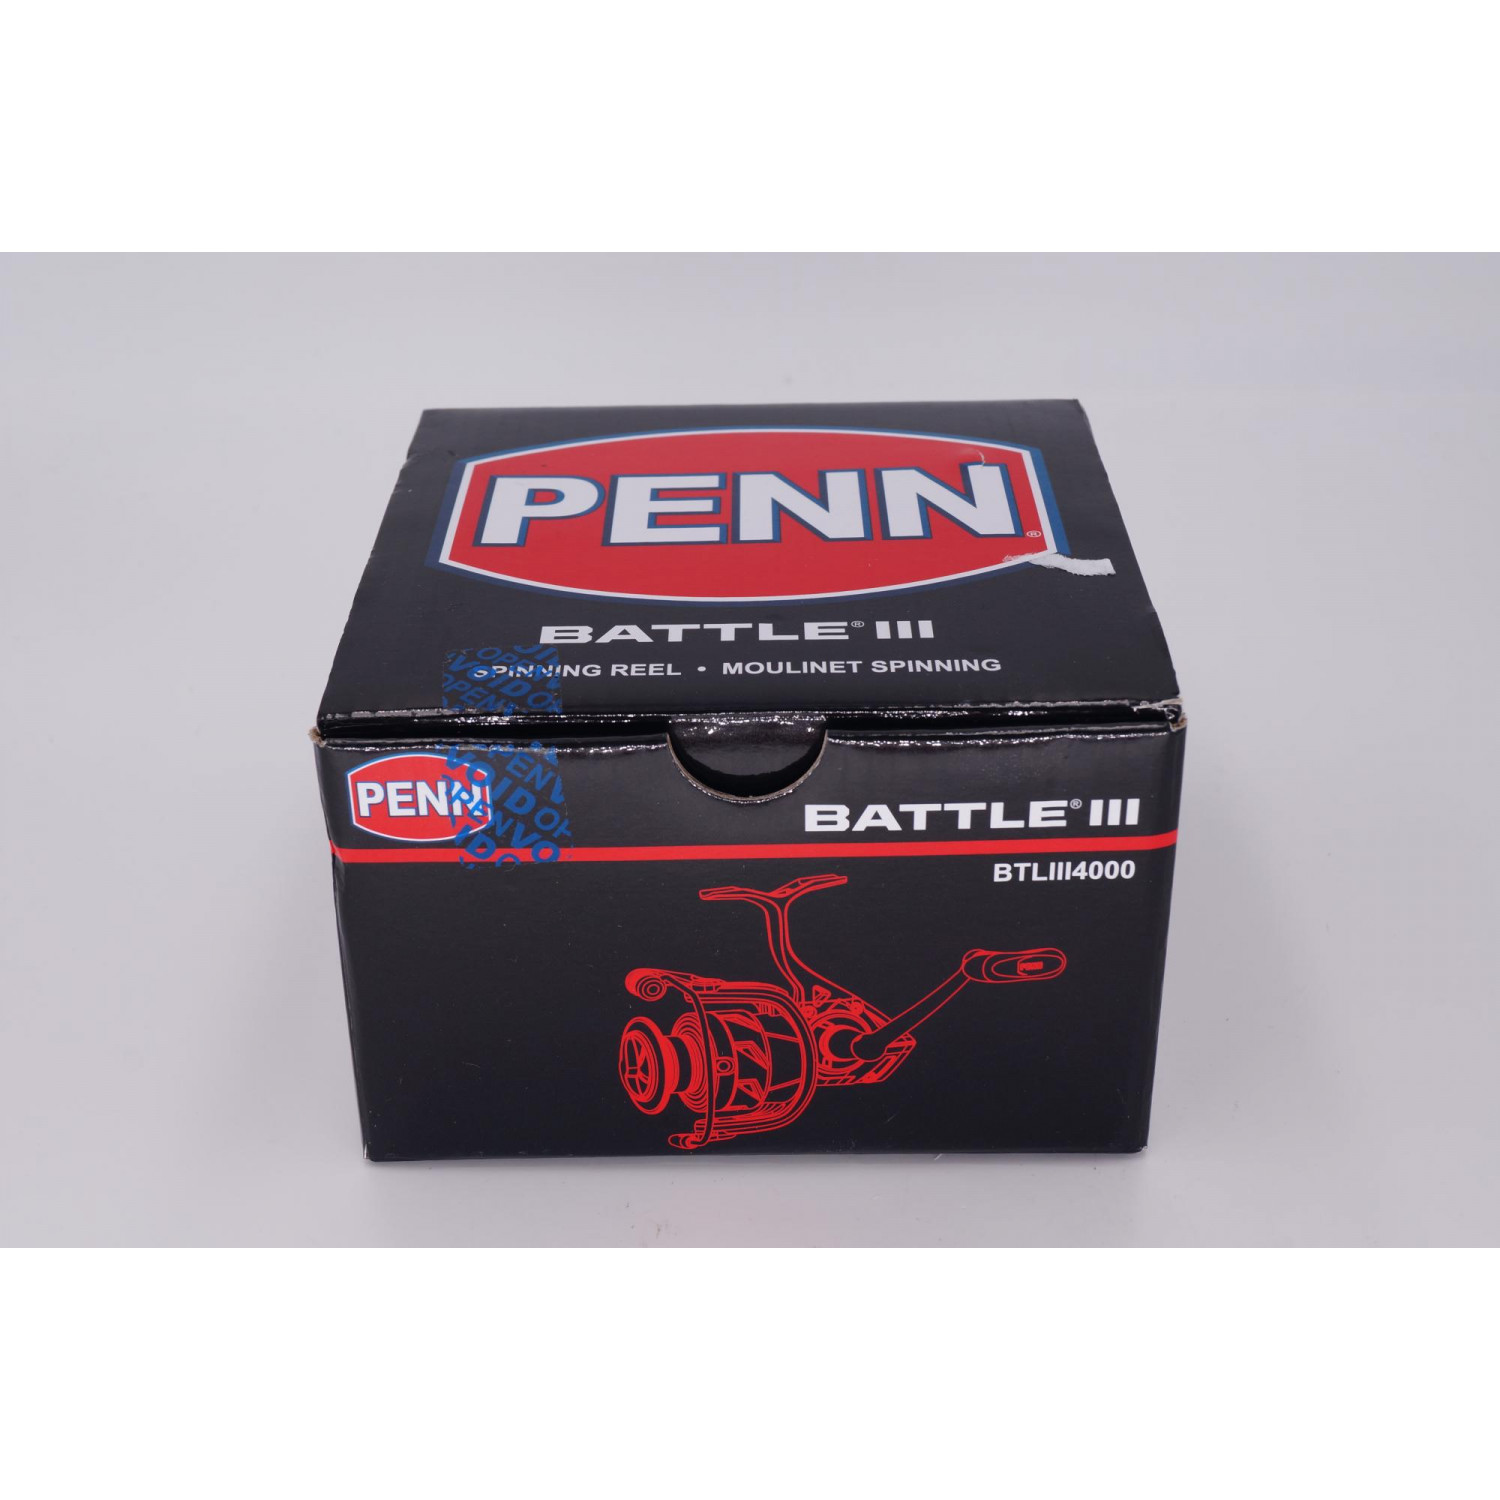 PENN Battle III, 4000, left and right hand, Spinning fishing reel